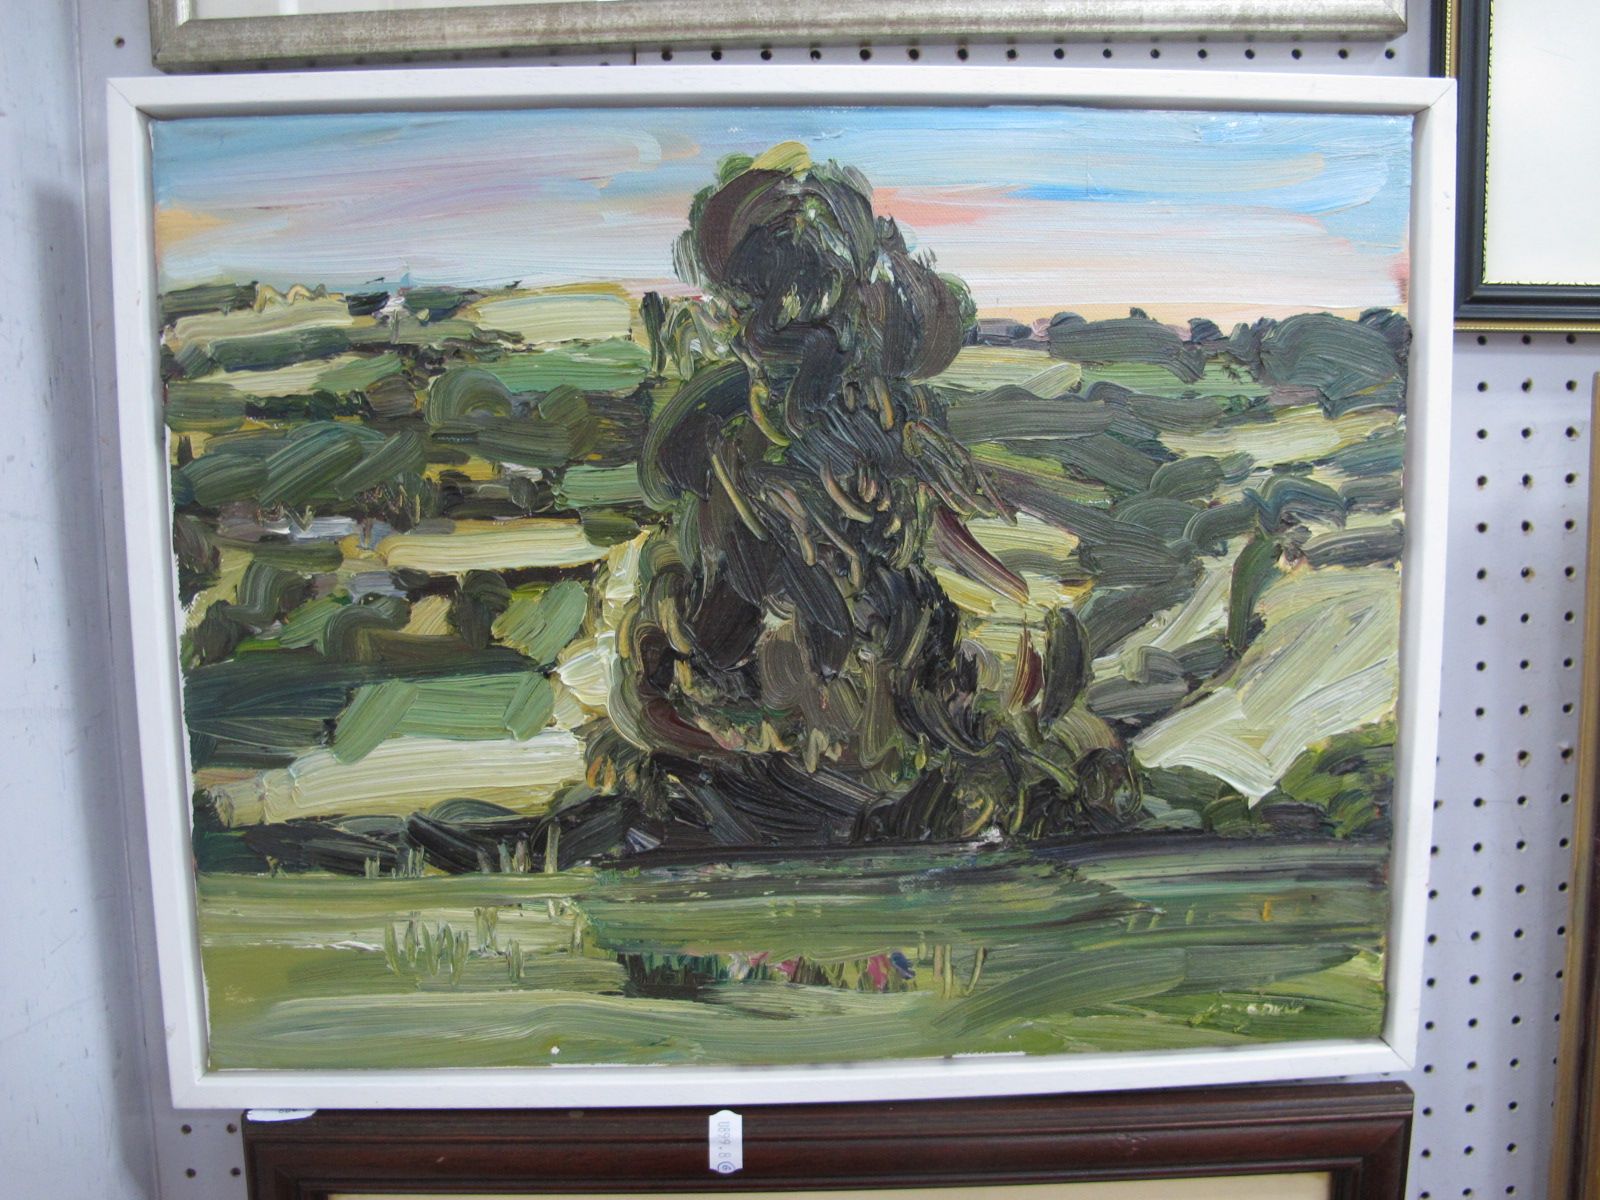 Craig Longmuir (Sheffield Artist) 'Moss Valley With a Tree', oil on canvas, 60.5 x 70cm, signed